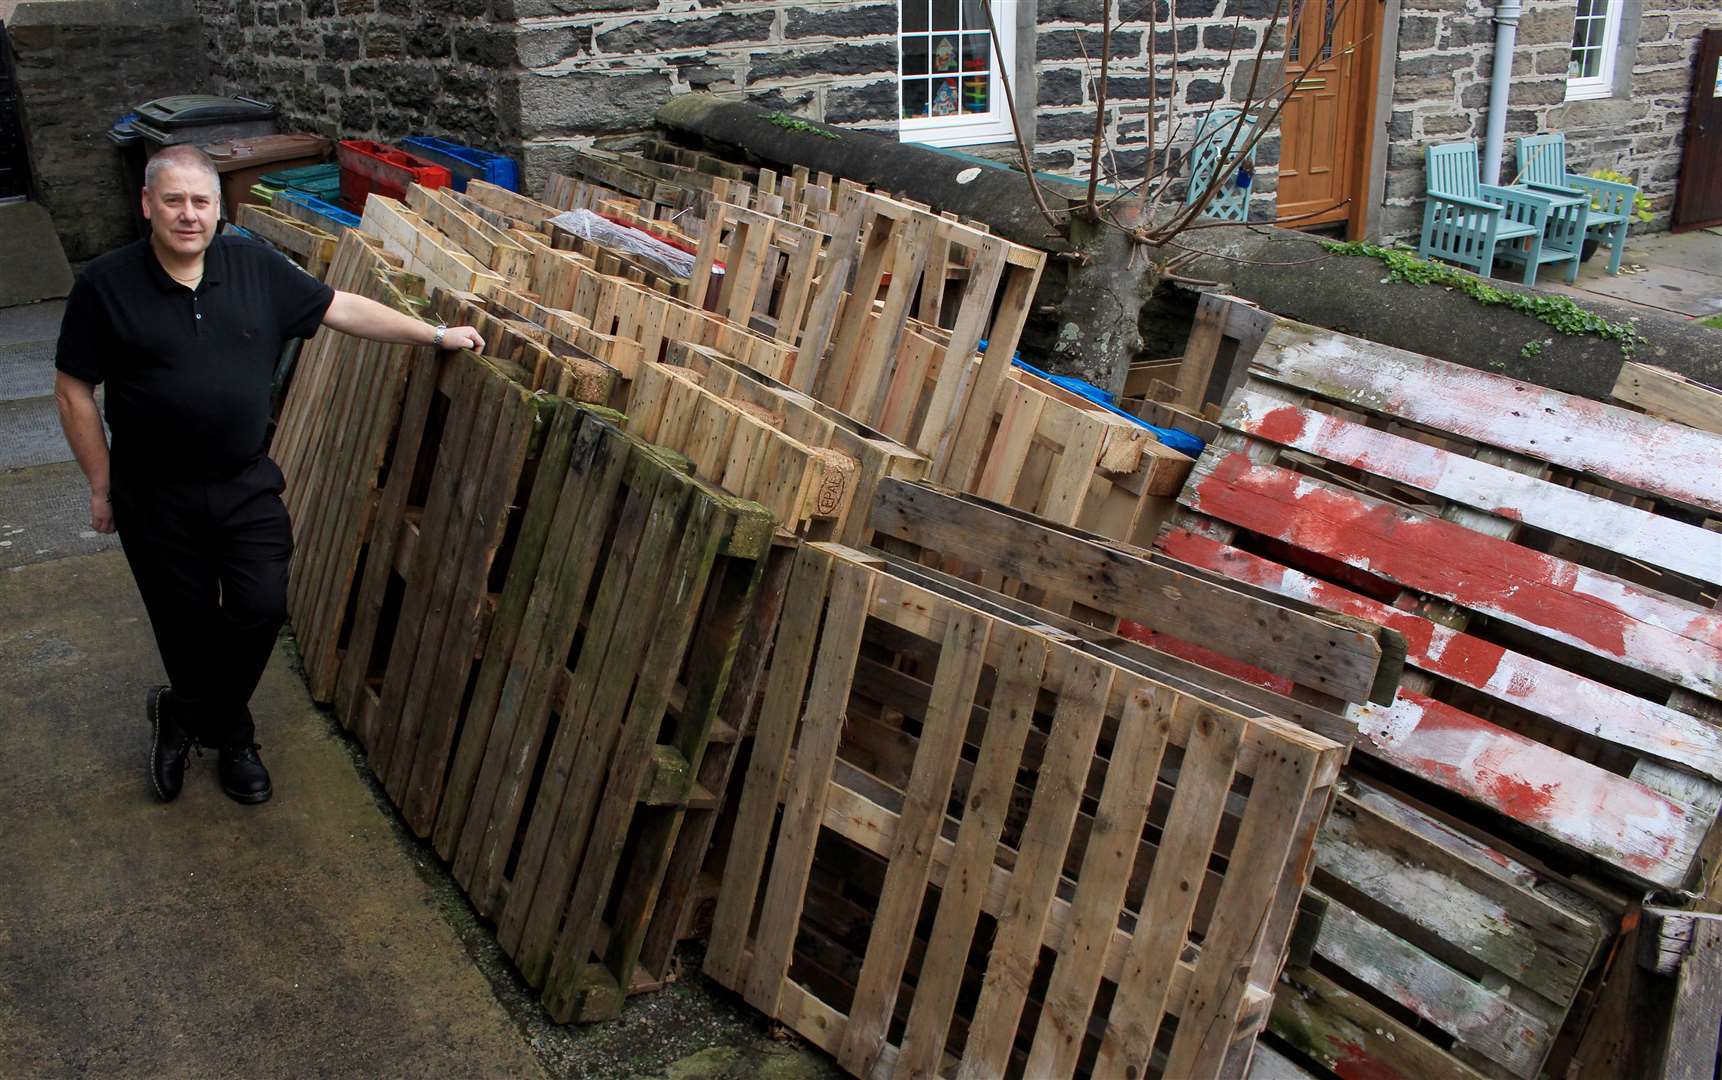 Event organiser Mervyn Hill had gathered between 60 and 70 wooden pallets from local businesses to be used in the Bignold Park bonfire, which has now been cancelled. Picture: Alan Hendry